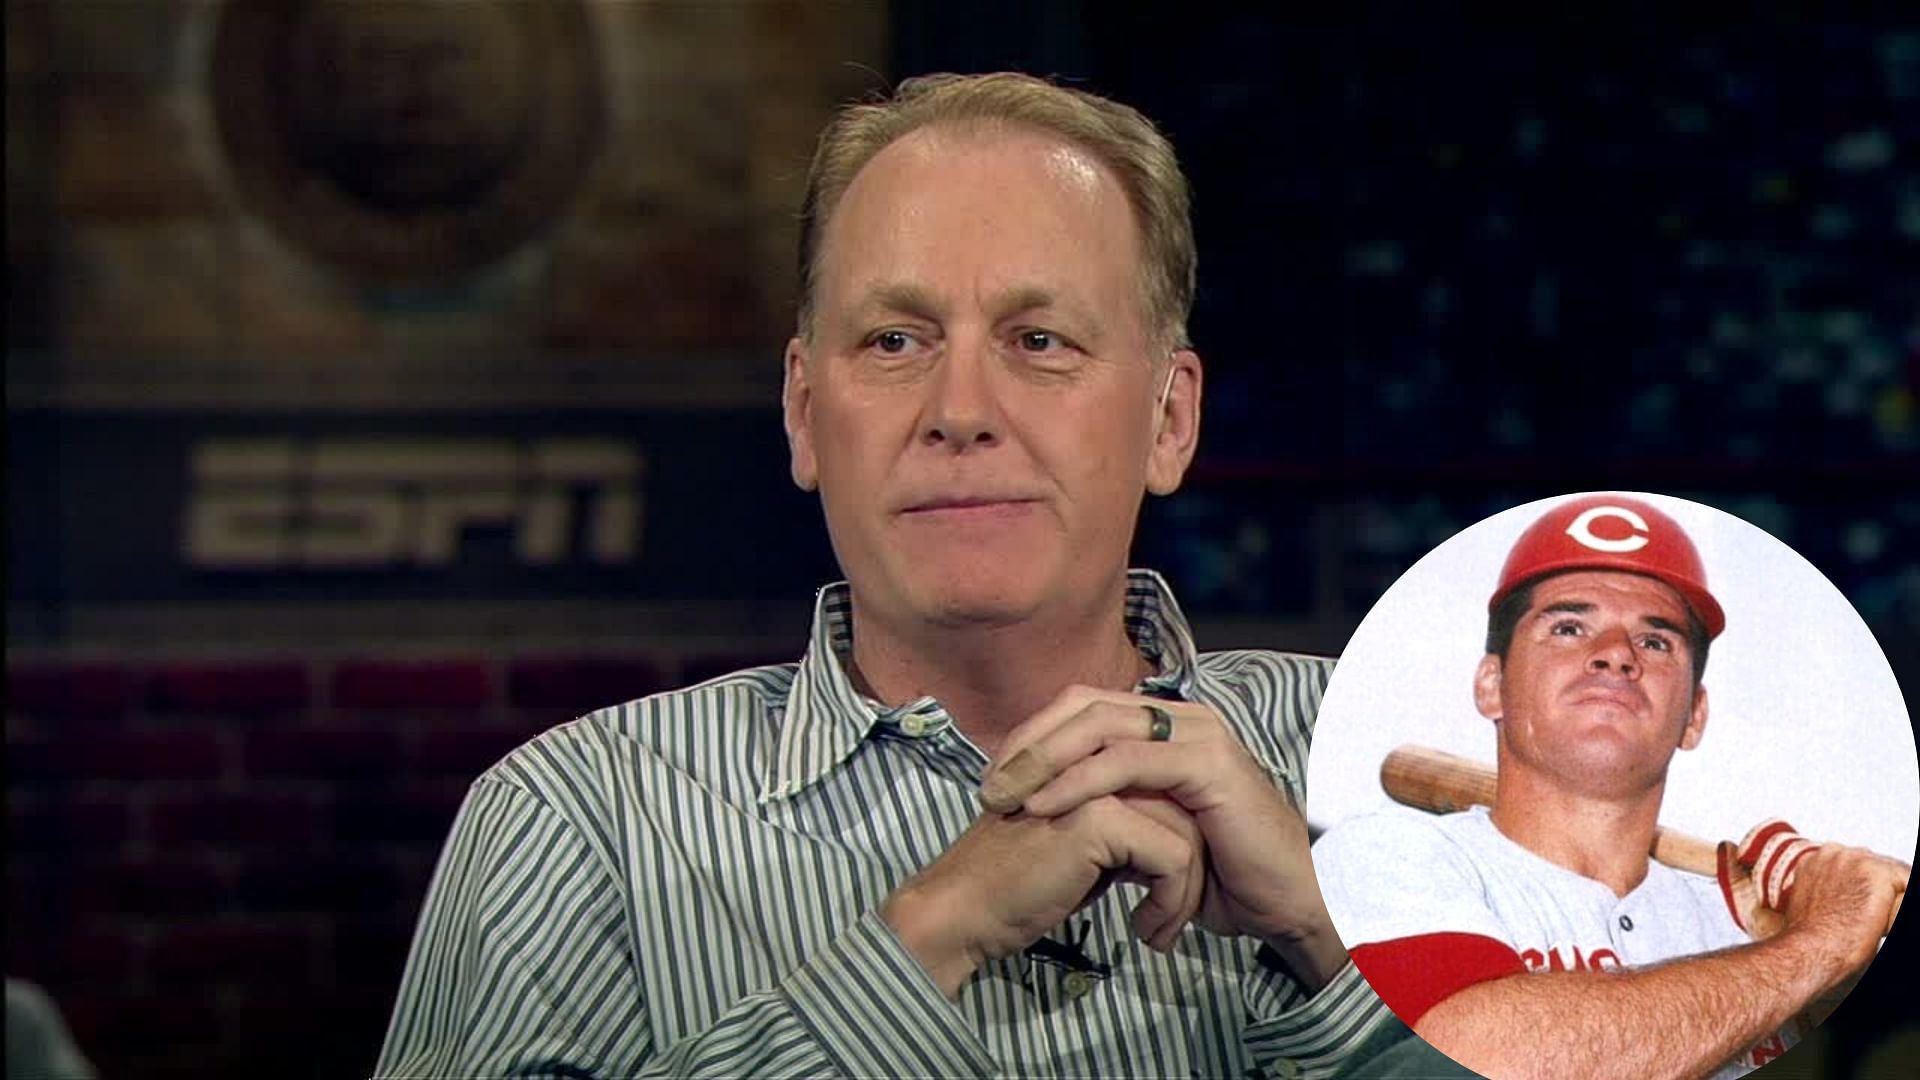 Curt Schilling on the set of ESPN; Pete during his MLB career (inset)